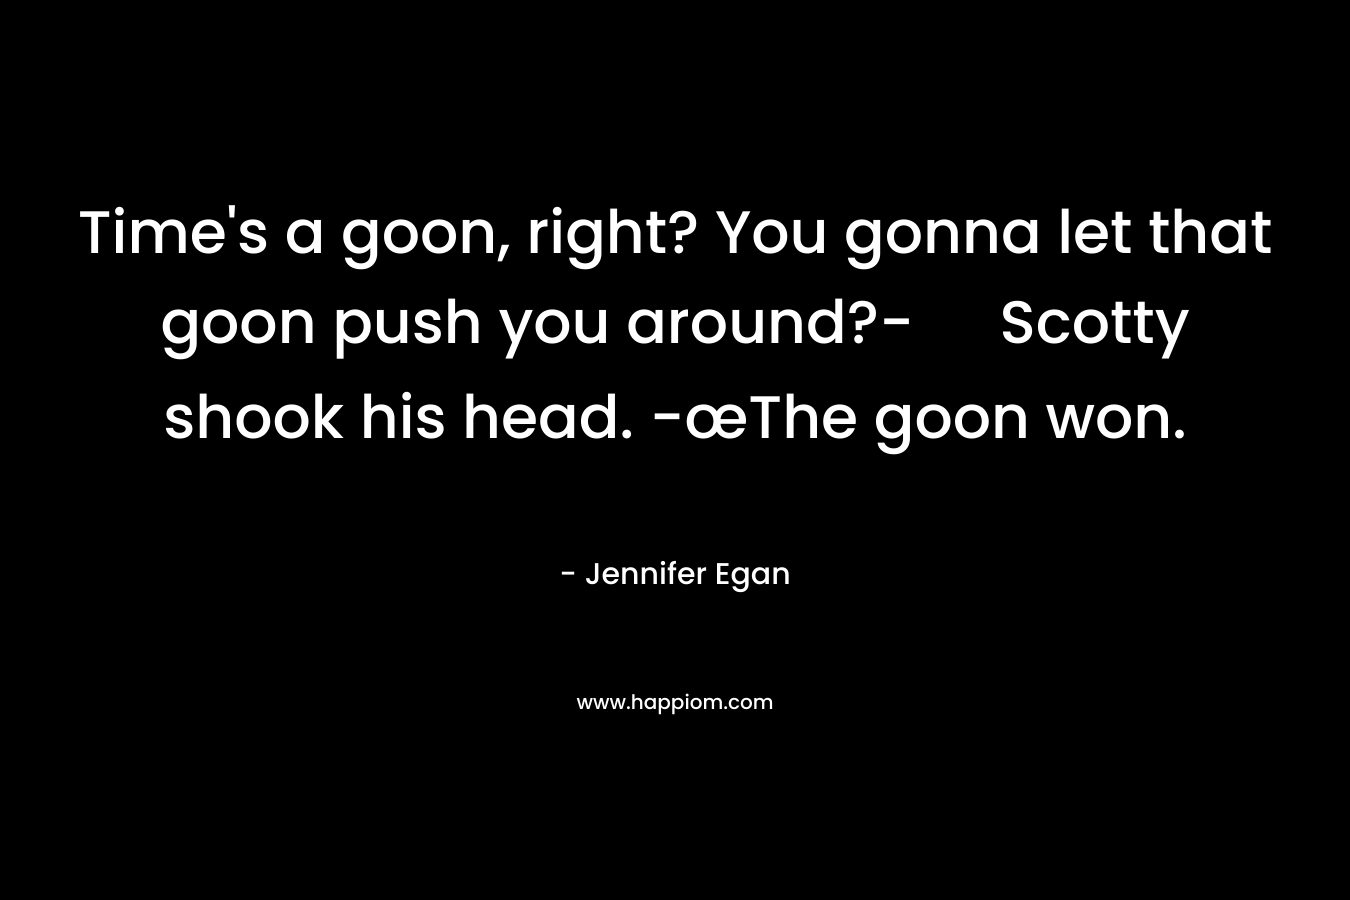 Time’s a goon, right? You gonna let that goon push you around?- Scotty shook his head. -œThe goon won. – Jennifer Egan